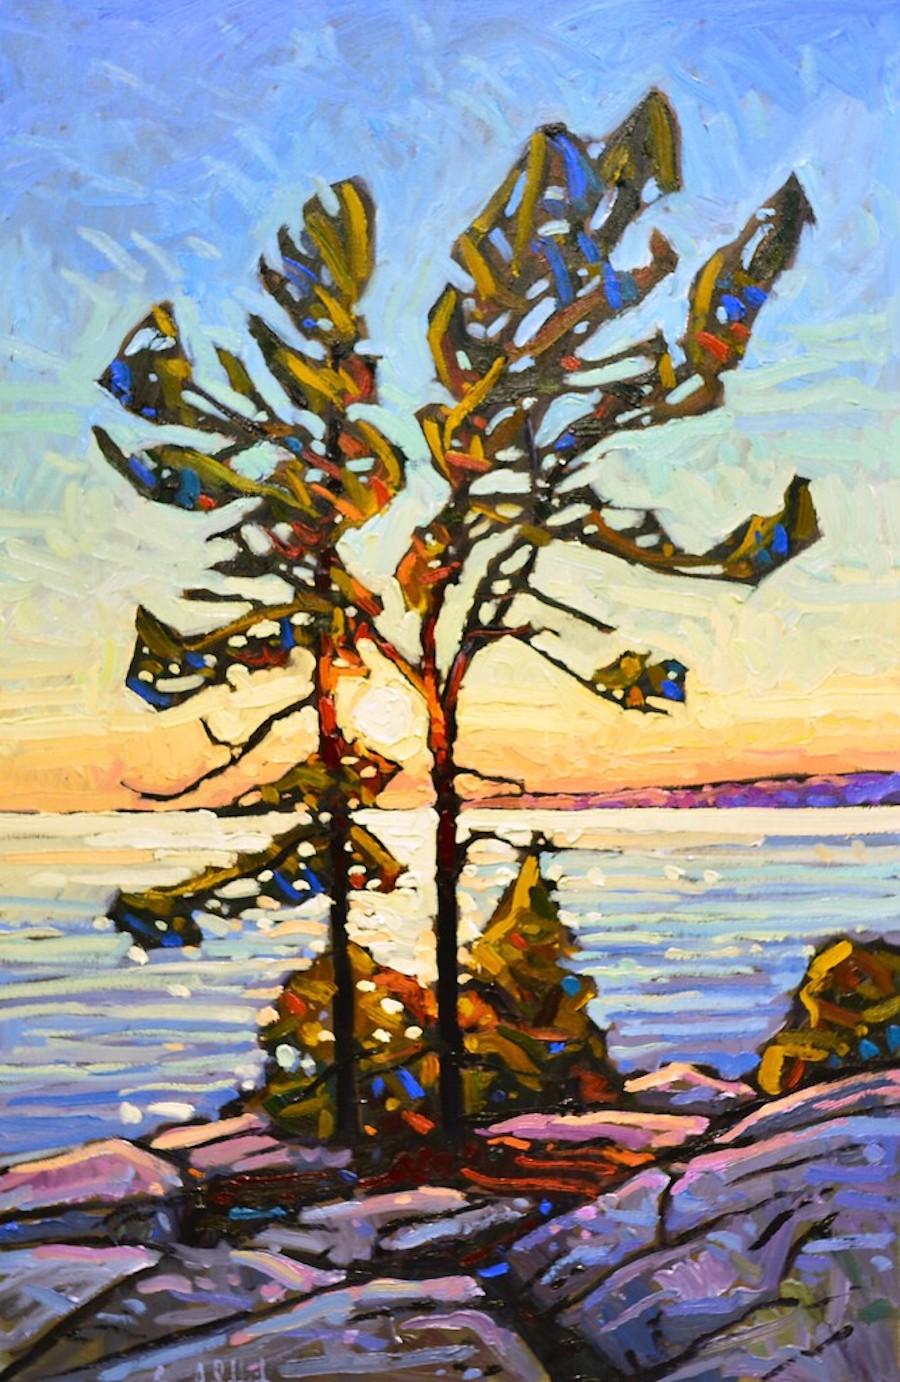 Contemporary Impressionist style landscape 'Noble Pines at Sunset' oil on canvas - Painting by Ryan A. Sobkovich